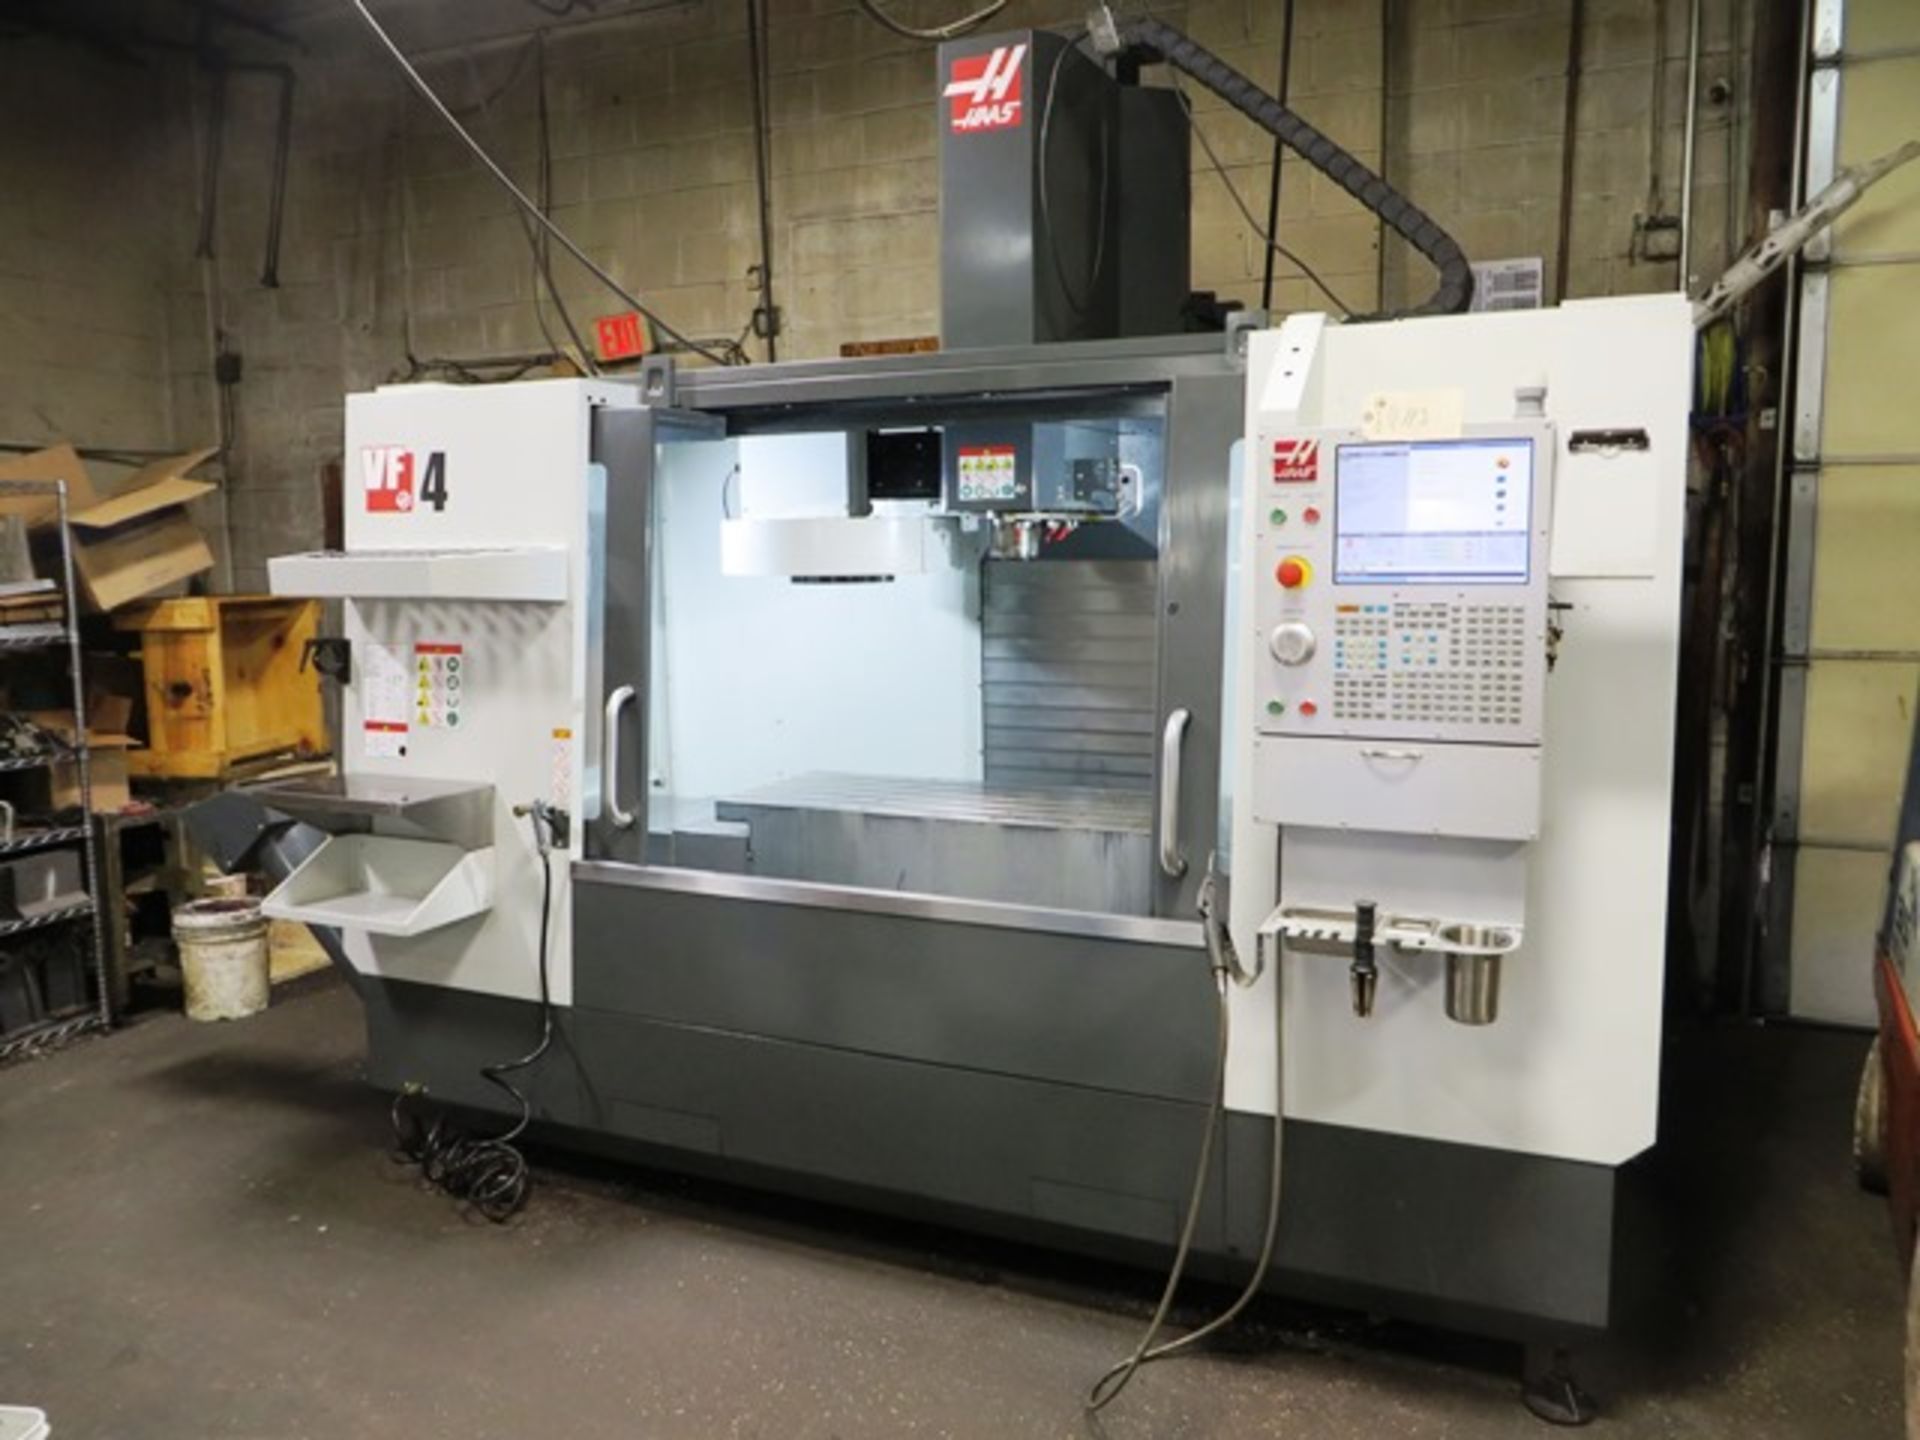 Haas VF-4 3-Axis CNC Vertical Machining Center - Image 4 of 7